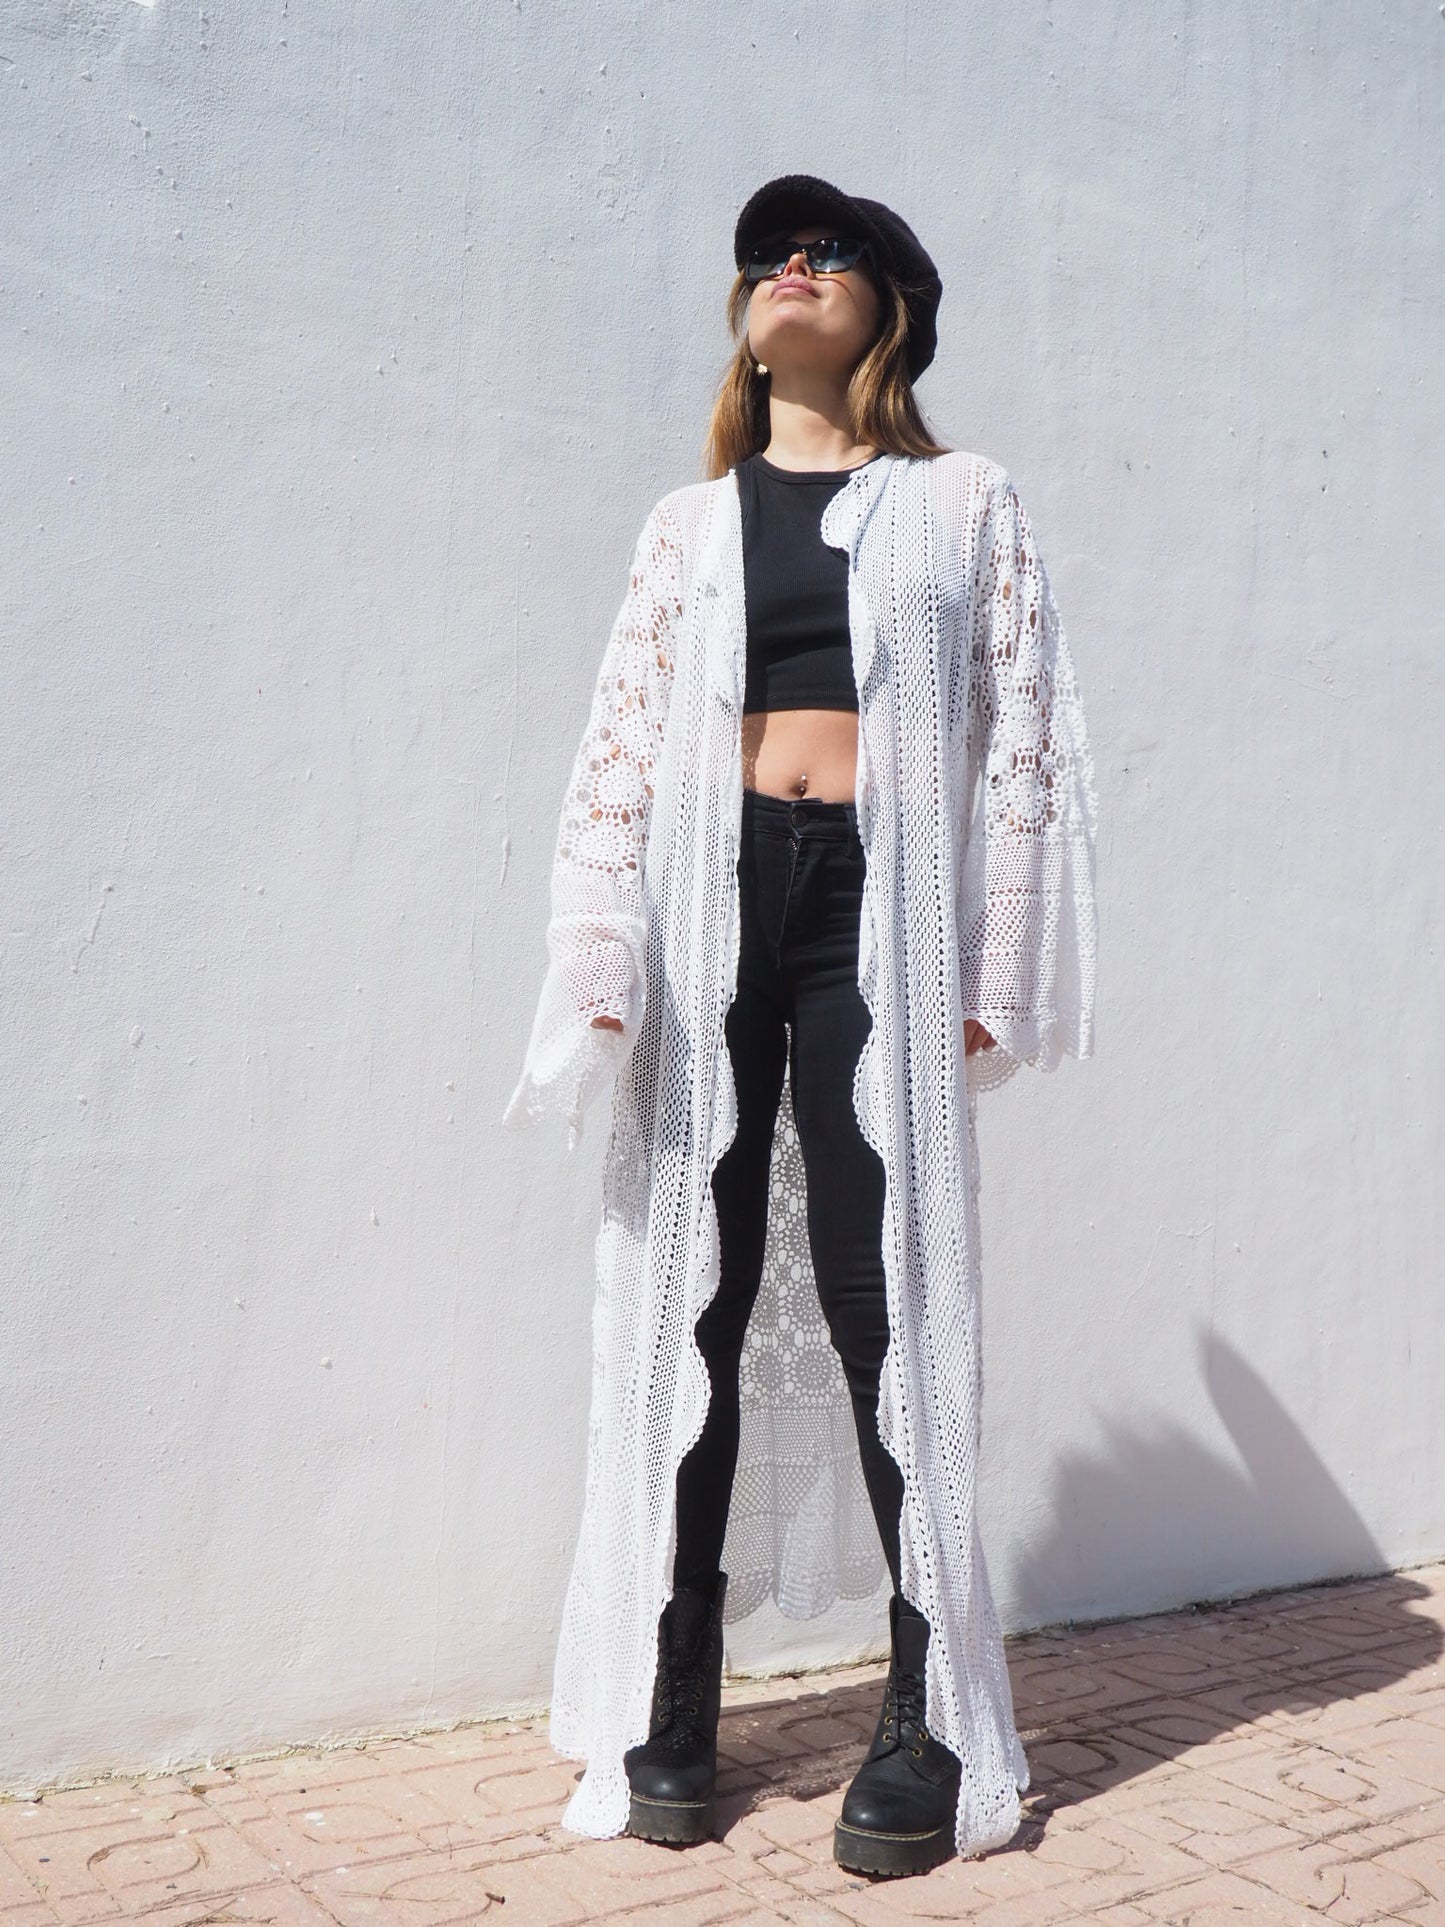 Vintage 1970’s French white crochet lace up-cycled jacket by Vagabond Ibiza